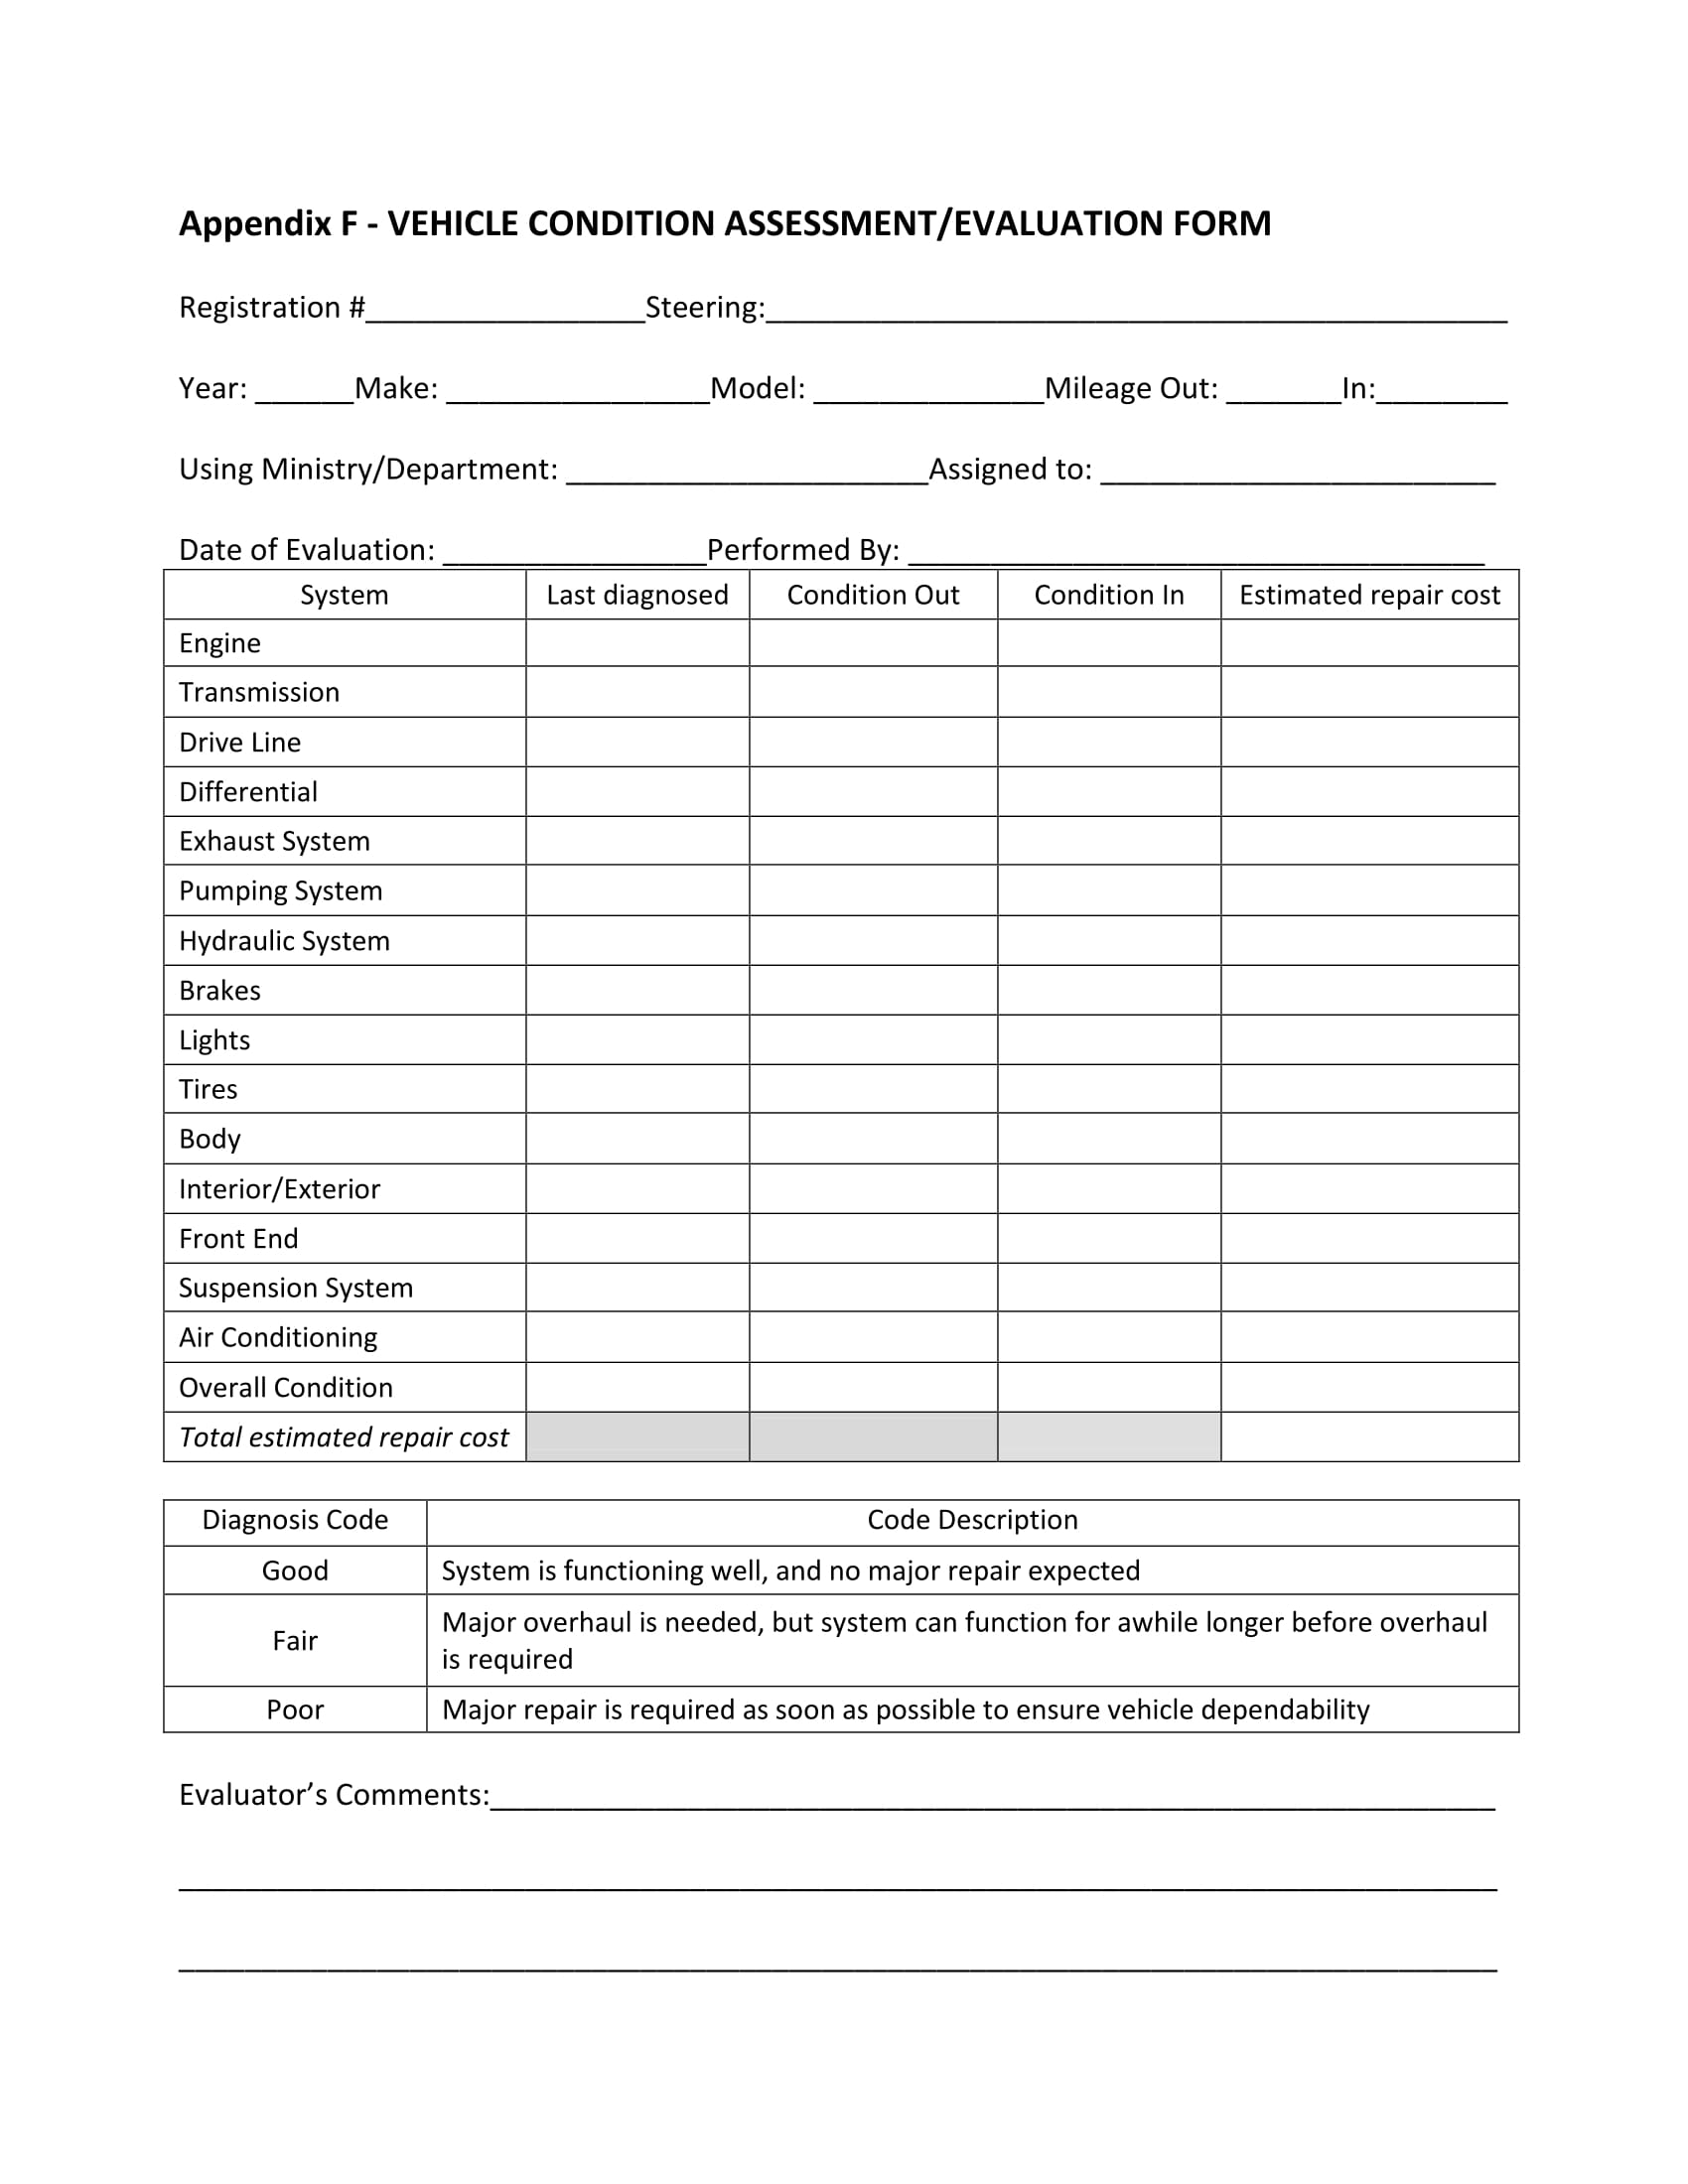 vehicle condition evaluation form 1